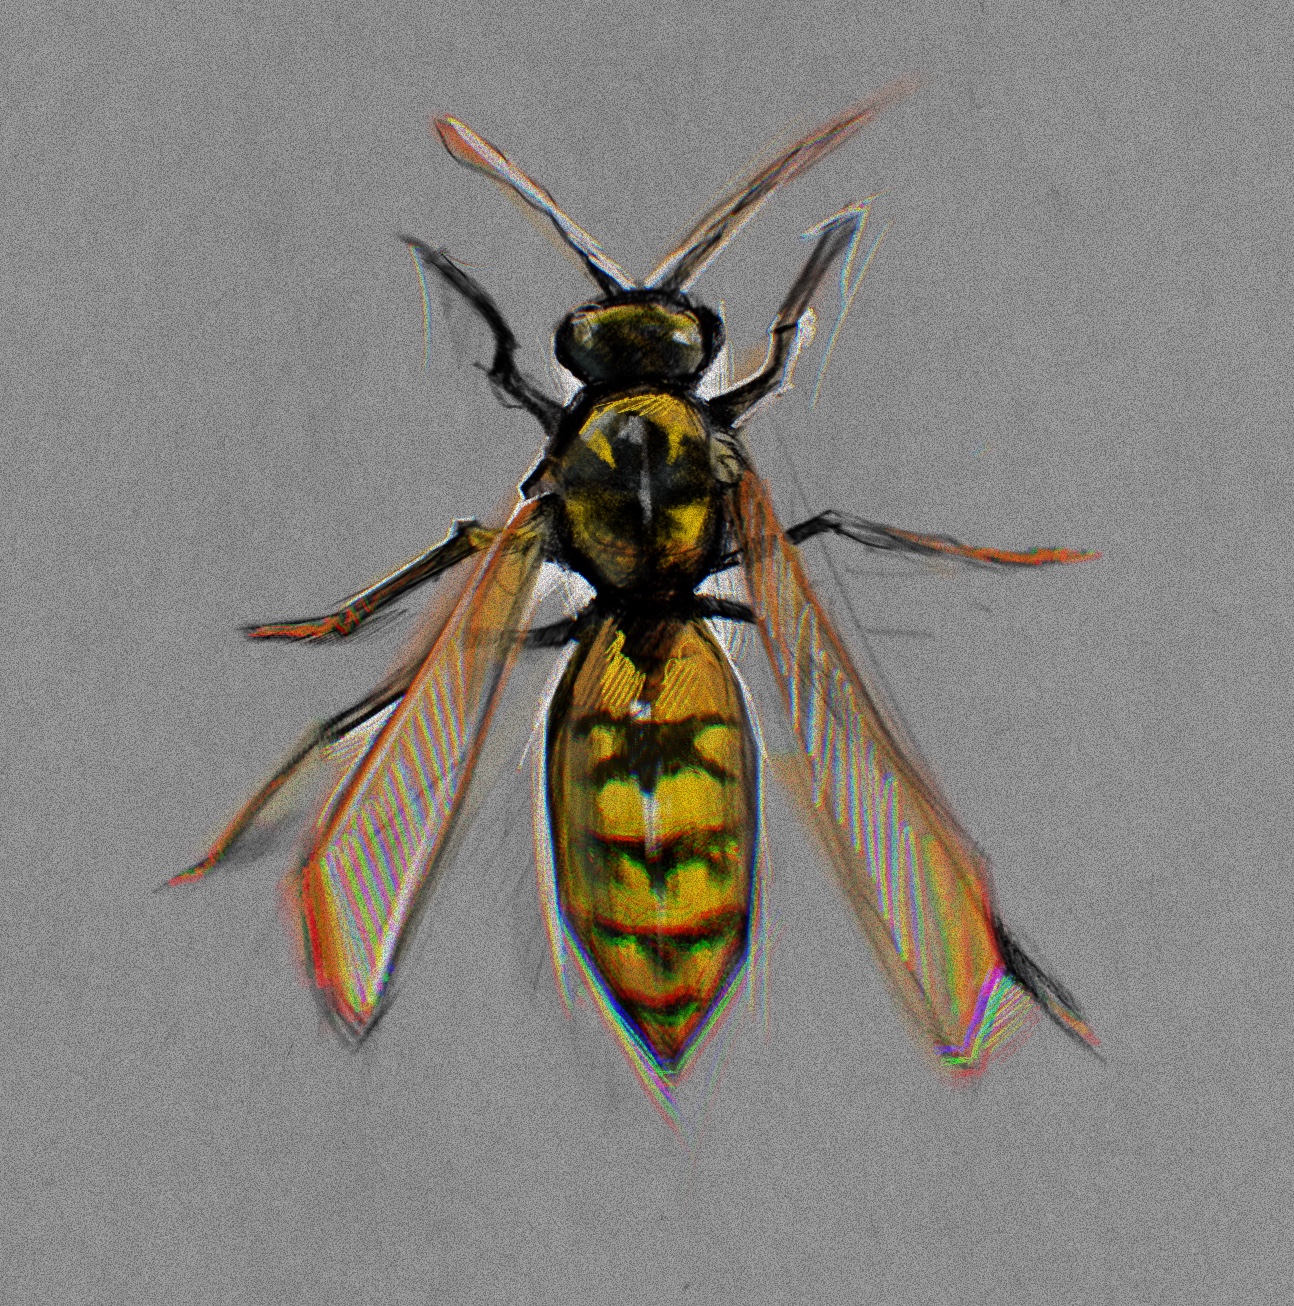 Study Insect 01